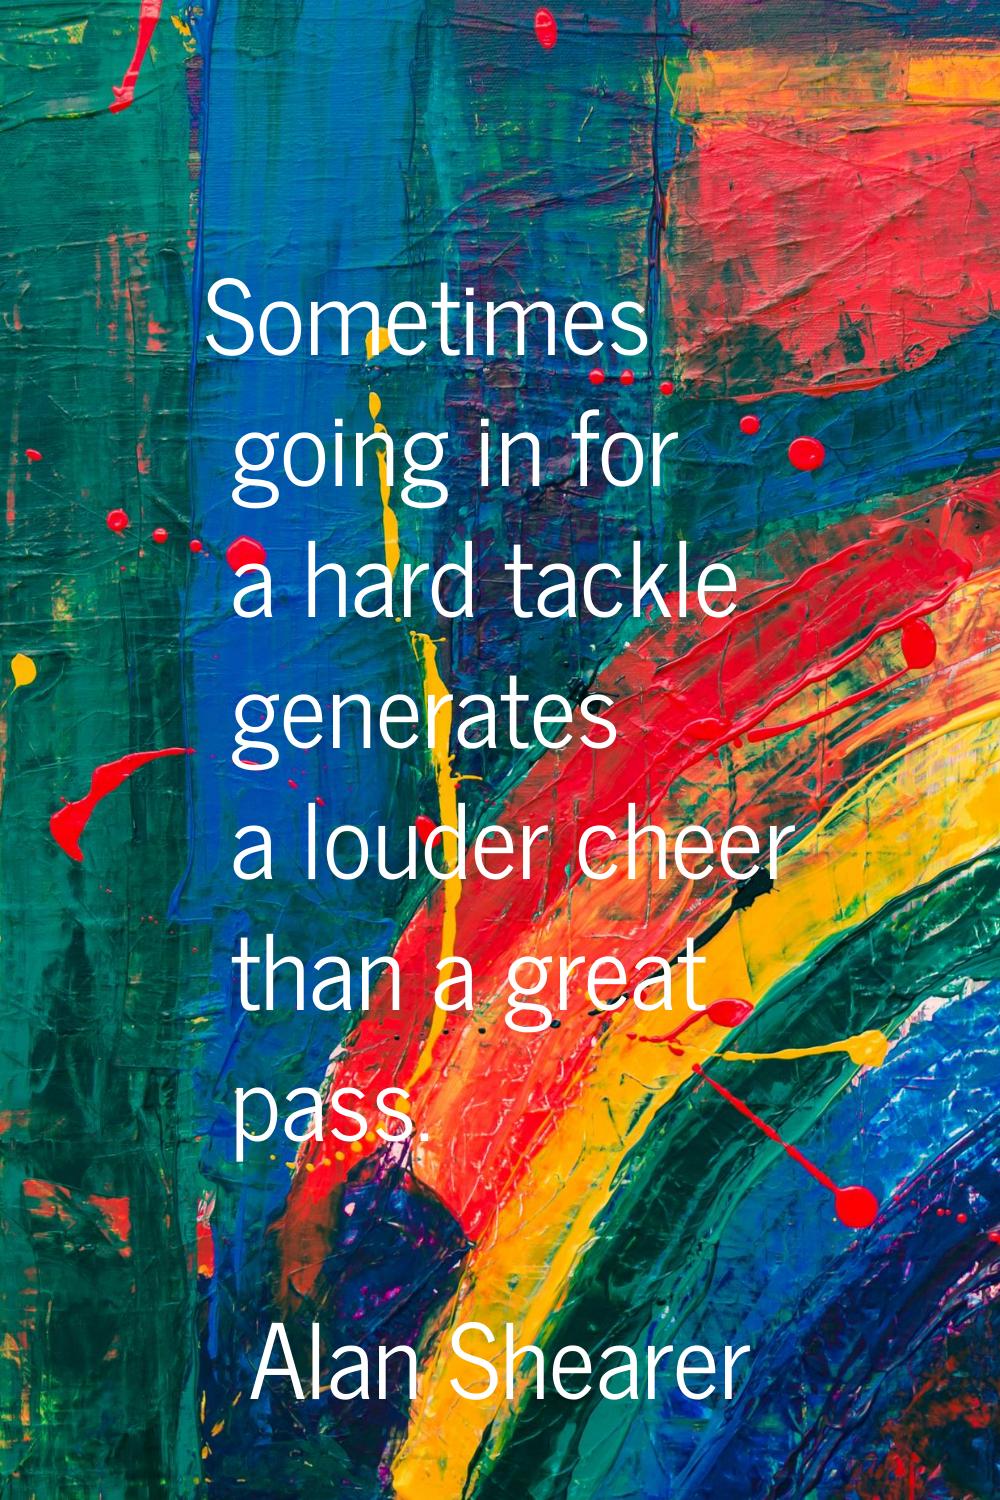 Sometimes going in for a hard tackle generates a louder cheer than a great pass.